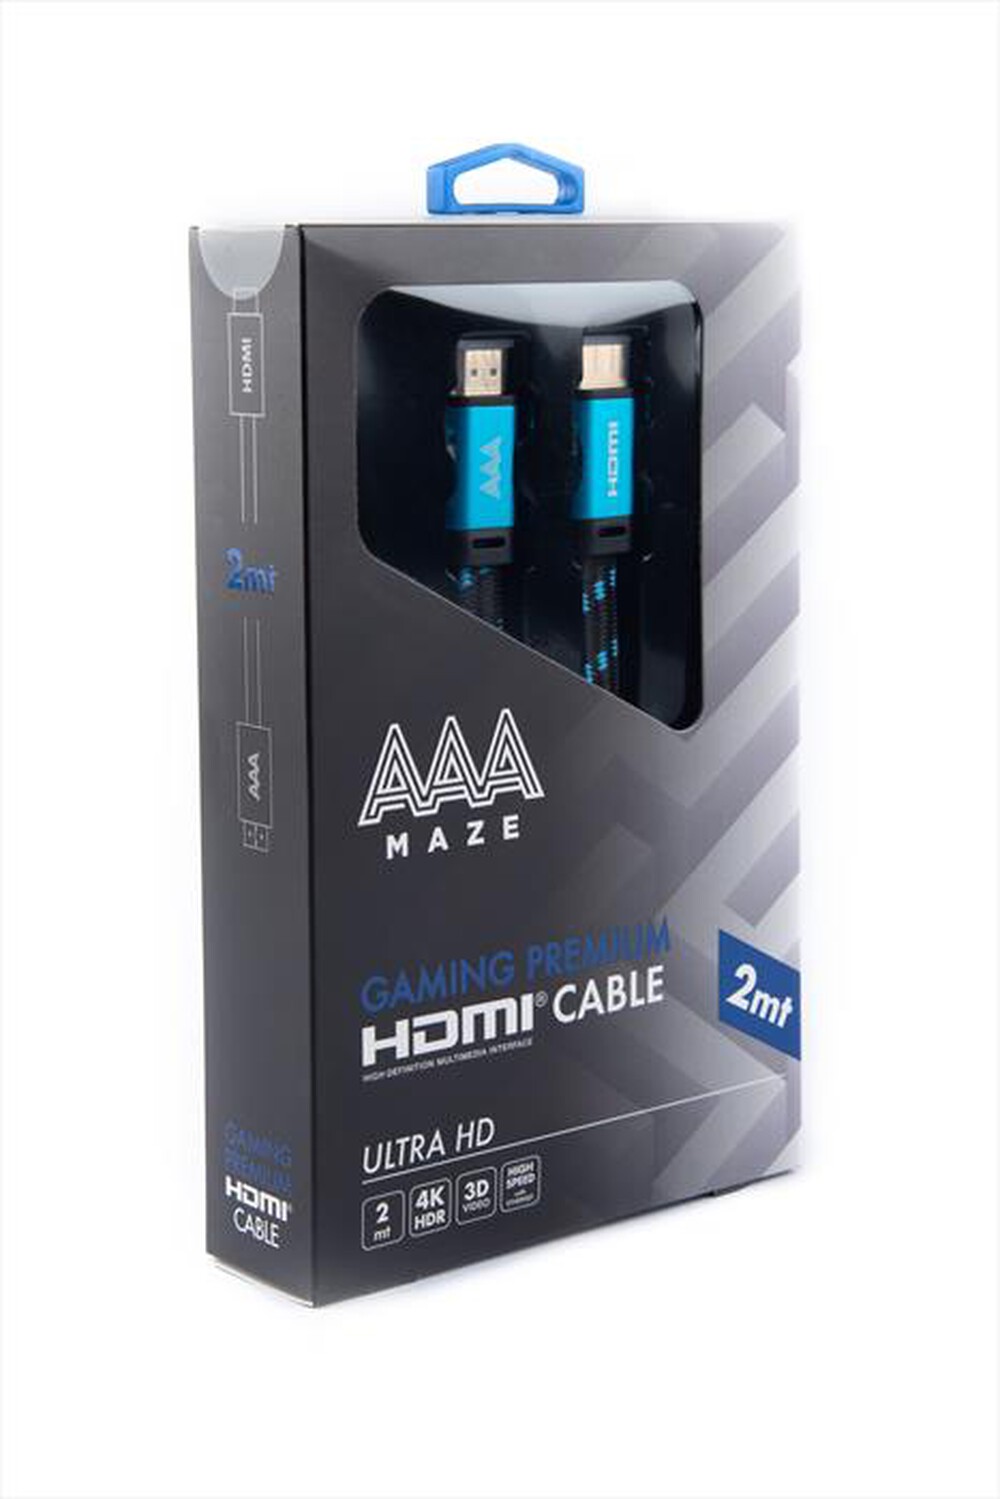 "AAAMAZE - GAMING HDMI FLAT CABLE"